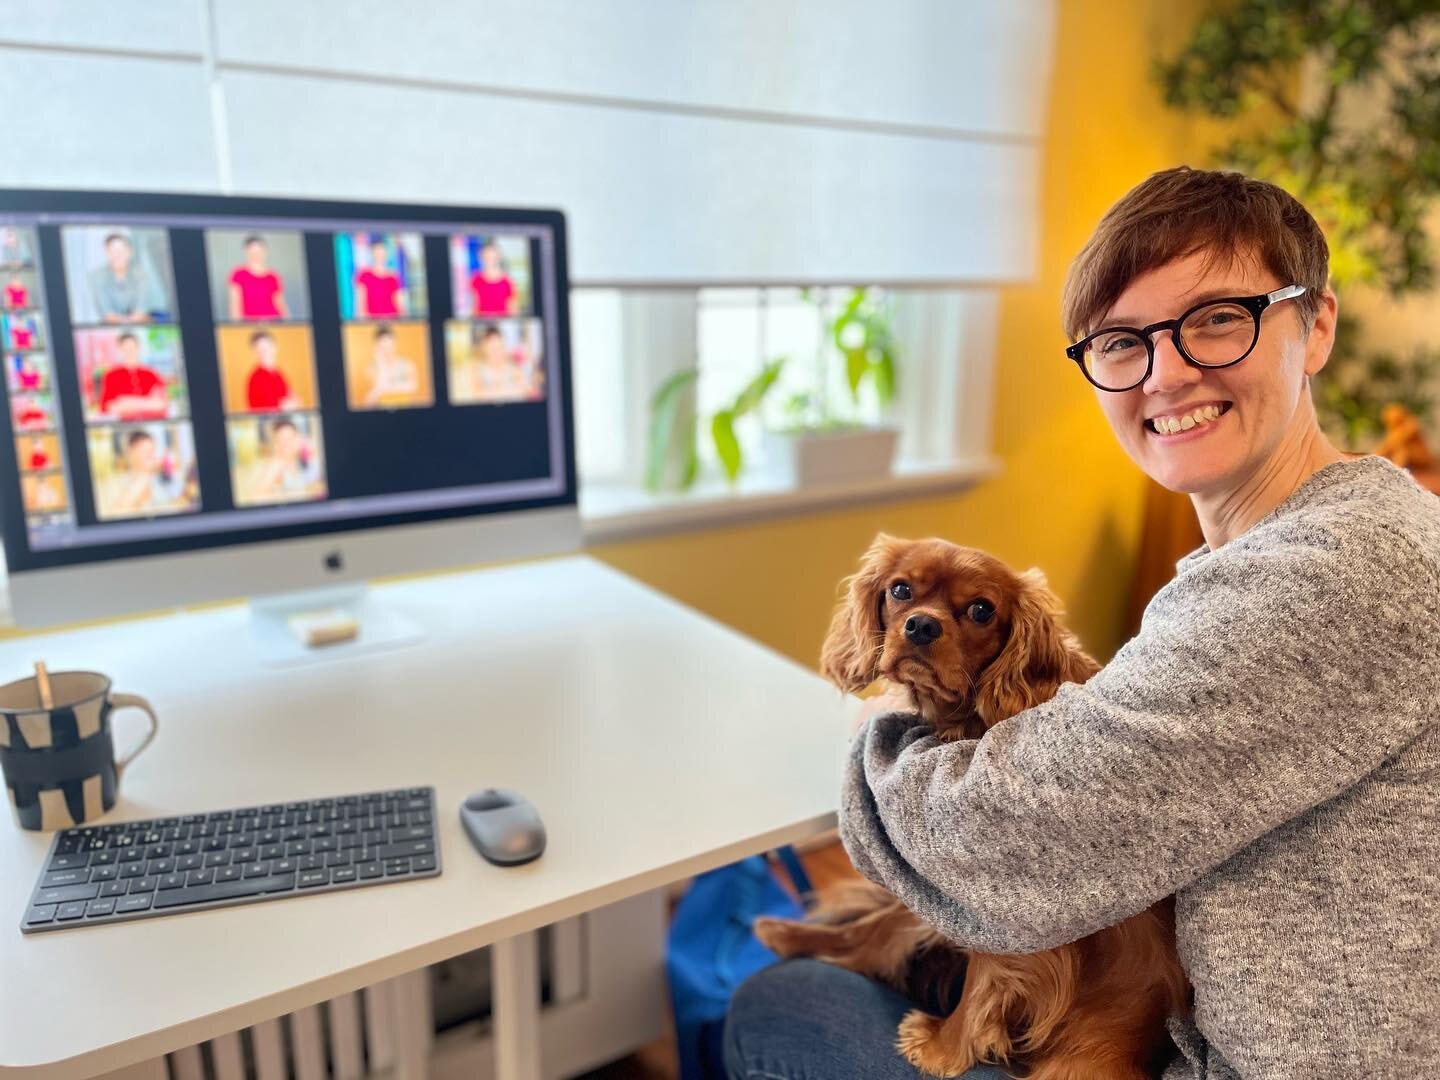 What a well received birthday present by Annie for Jenni @themesshallfeedingclinic. My furry studio assistant 🐶 Oskar 🐶 is helping through what he gives best: cuddles! ❤️ #wgtncc #wellingtonnz #nzportraitphotographer #headshotsphotographer #commerc